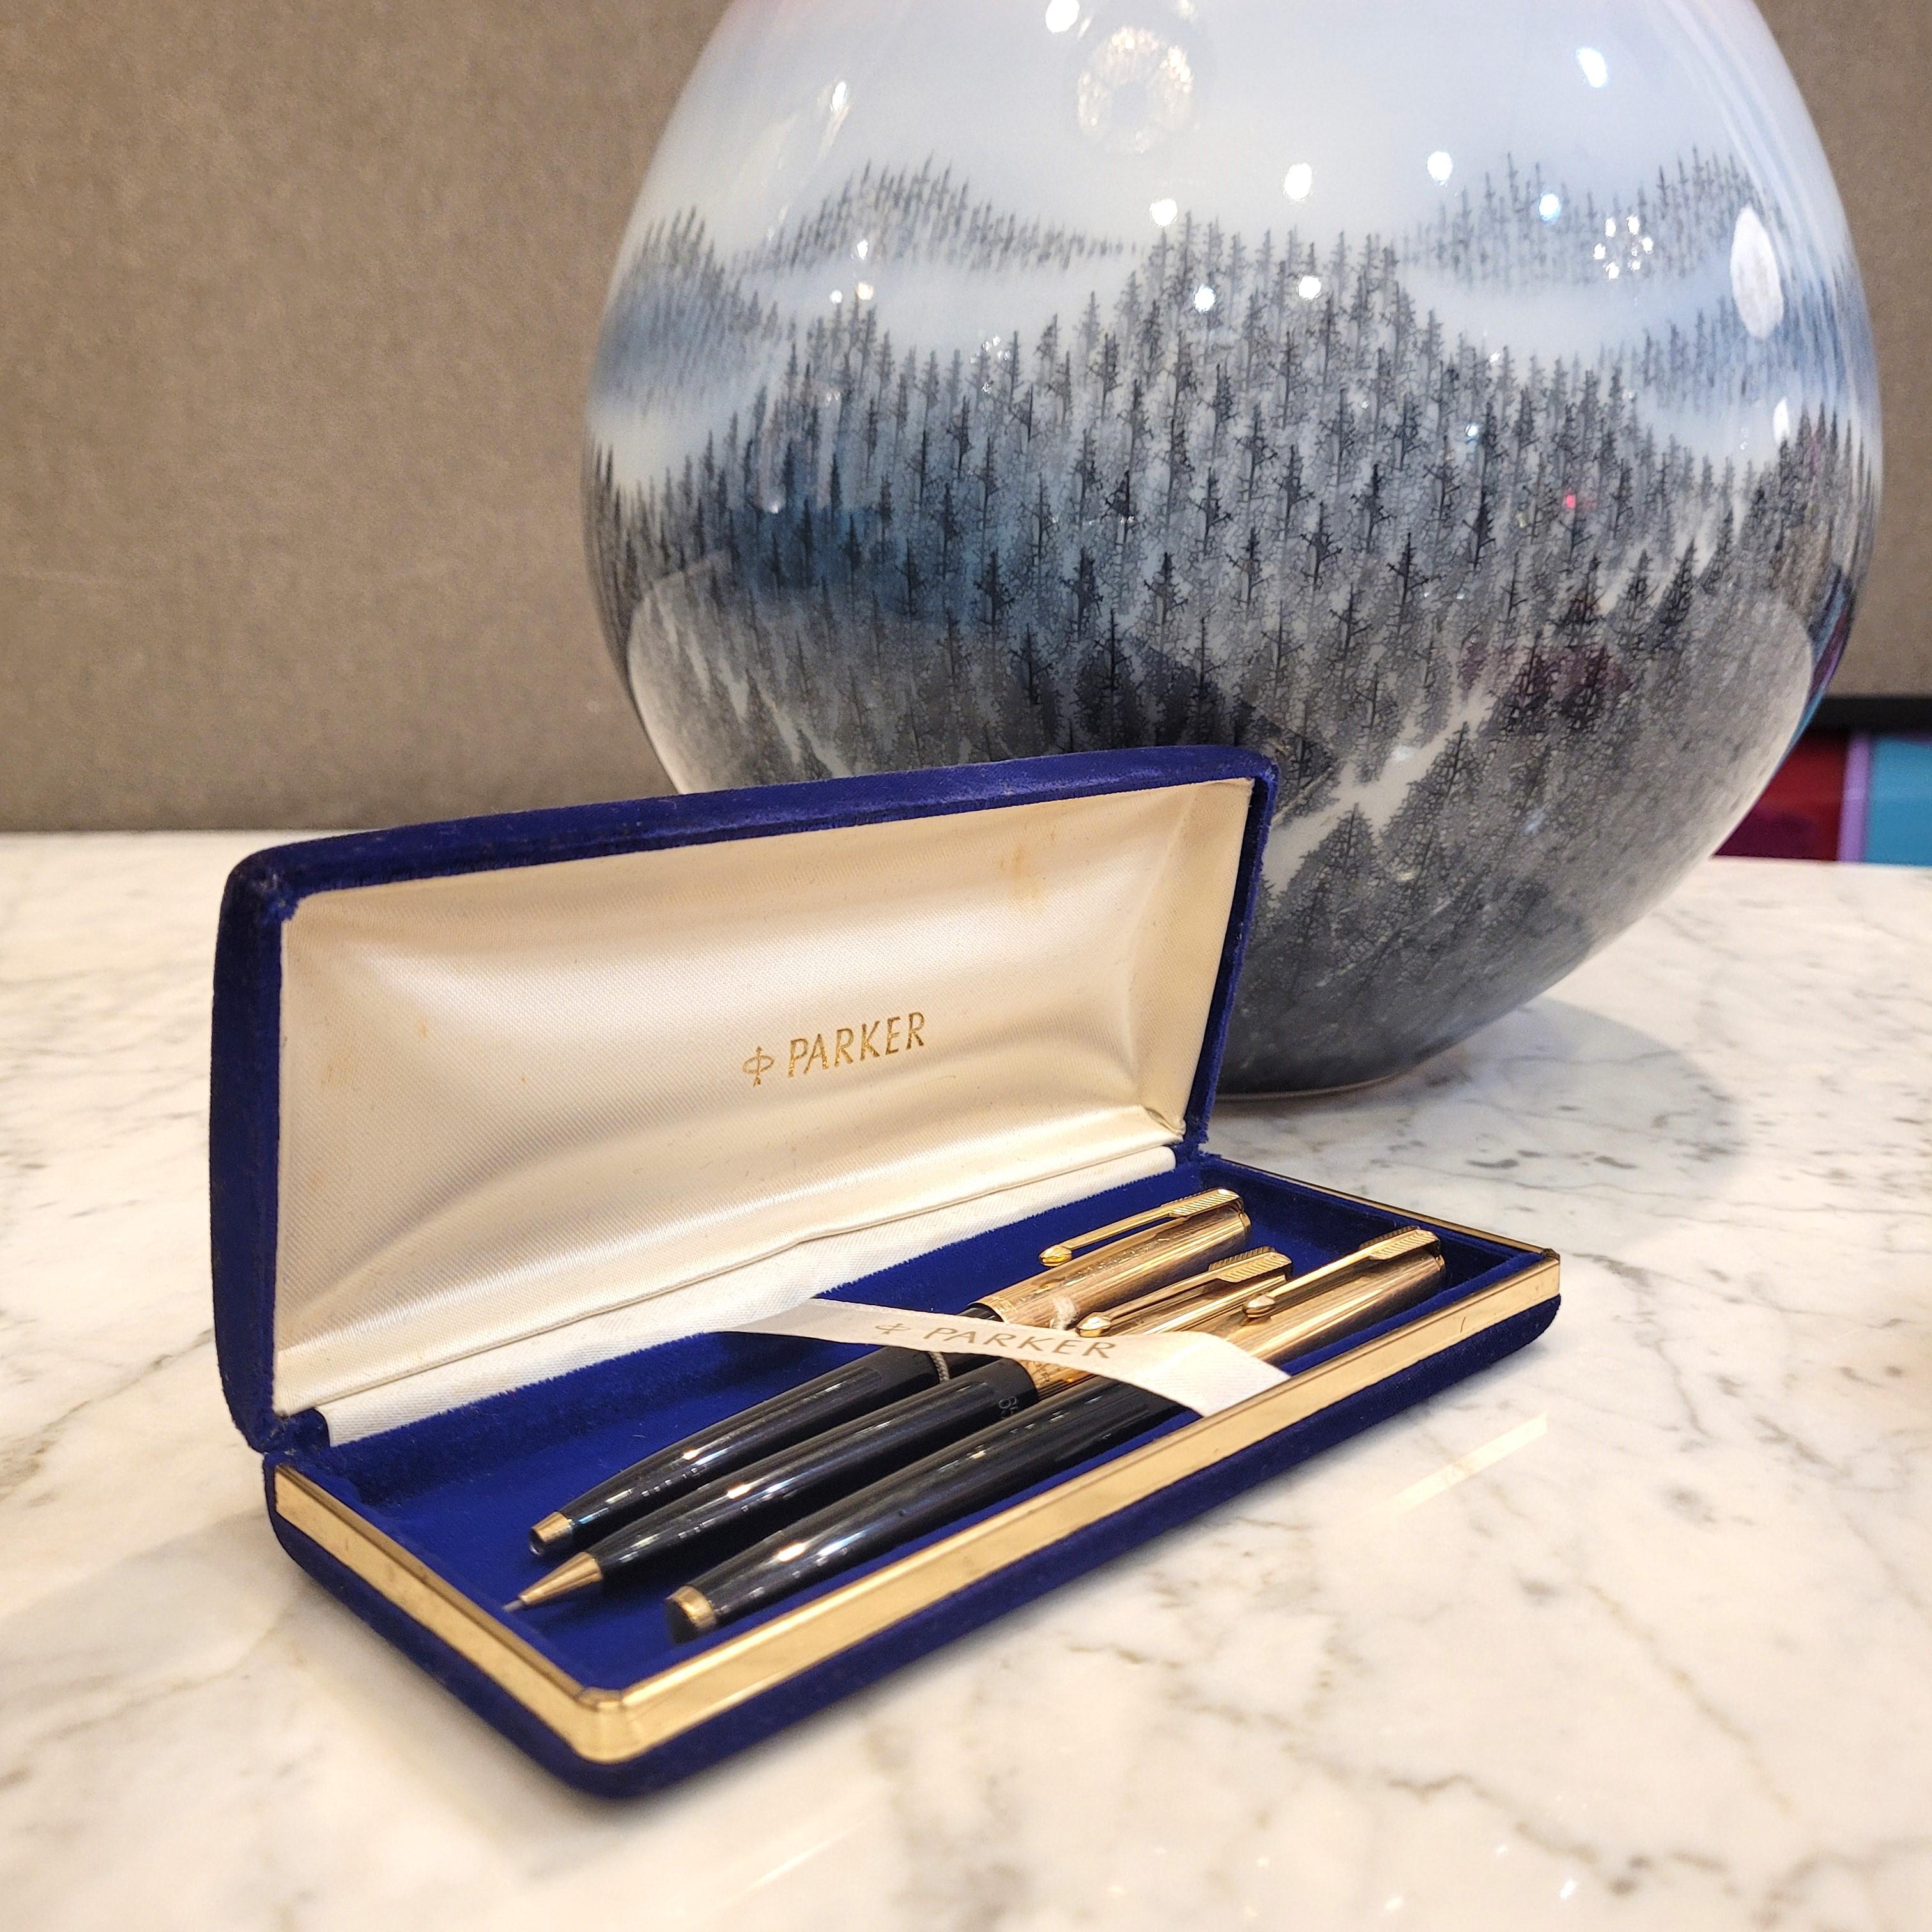 Excellent Parker writing set, consisting of a fountain pen, ballpoint pen and model 65 Custom Black mechanical pencil in its original case. Each of the three pieces retains its optimized silhouette and its emblematic fluted gold-plated steel cap